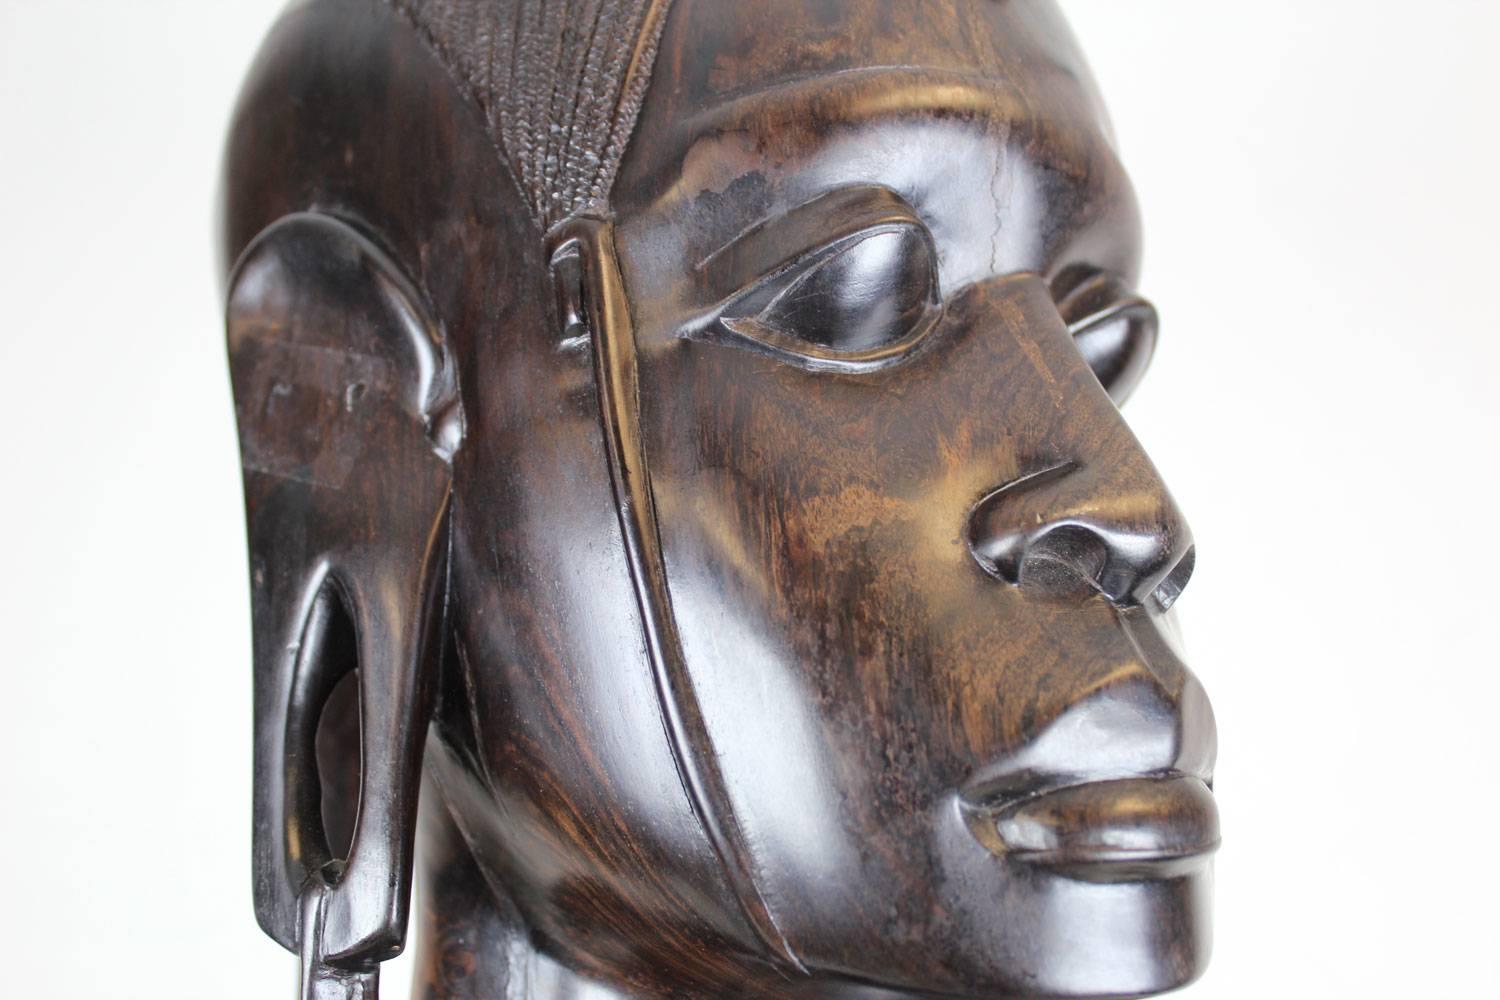 This piece was acquired from a collector who is downsizing her amazing collection.  This piece was hand carved by an artisan in Africa from one piece of heavy ironwood.  Note the equisite detail in the images.  The African sculptor utilized the